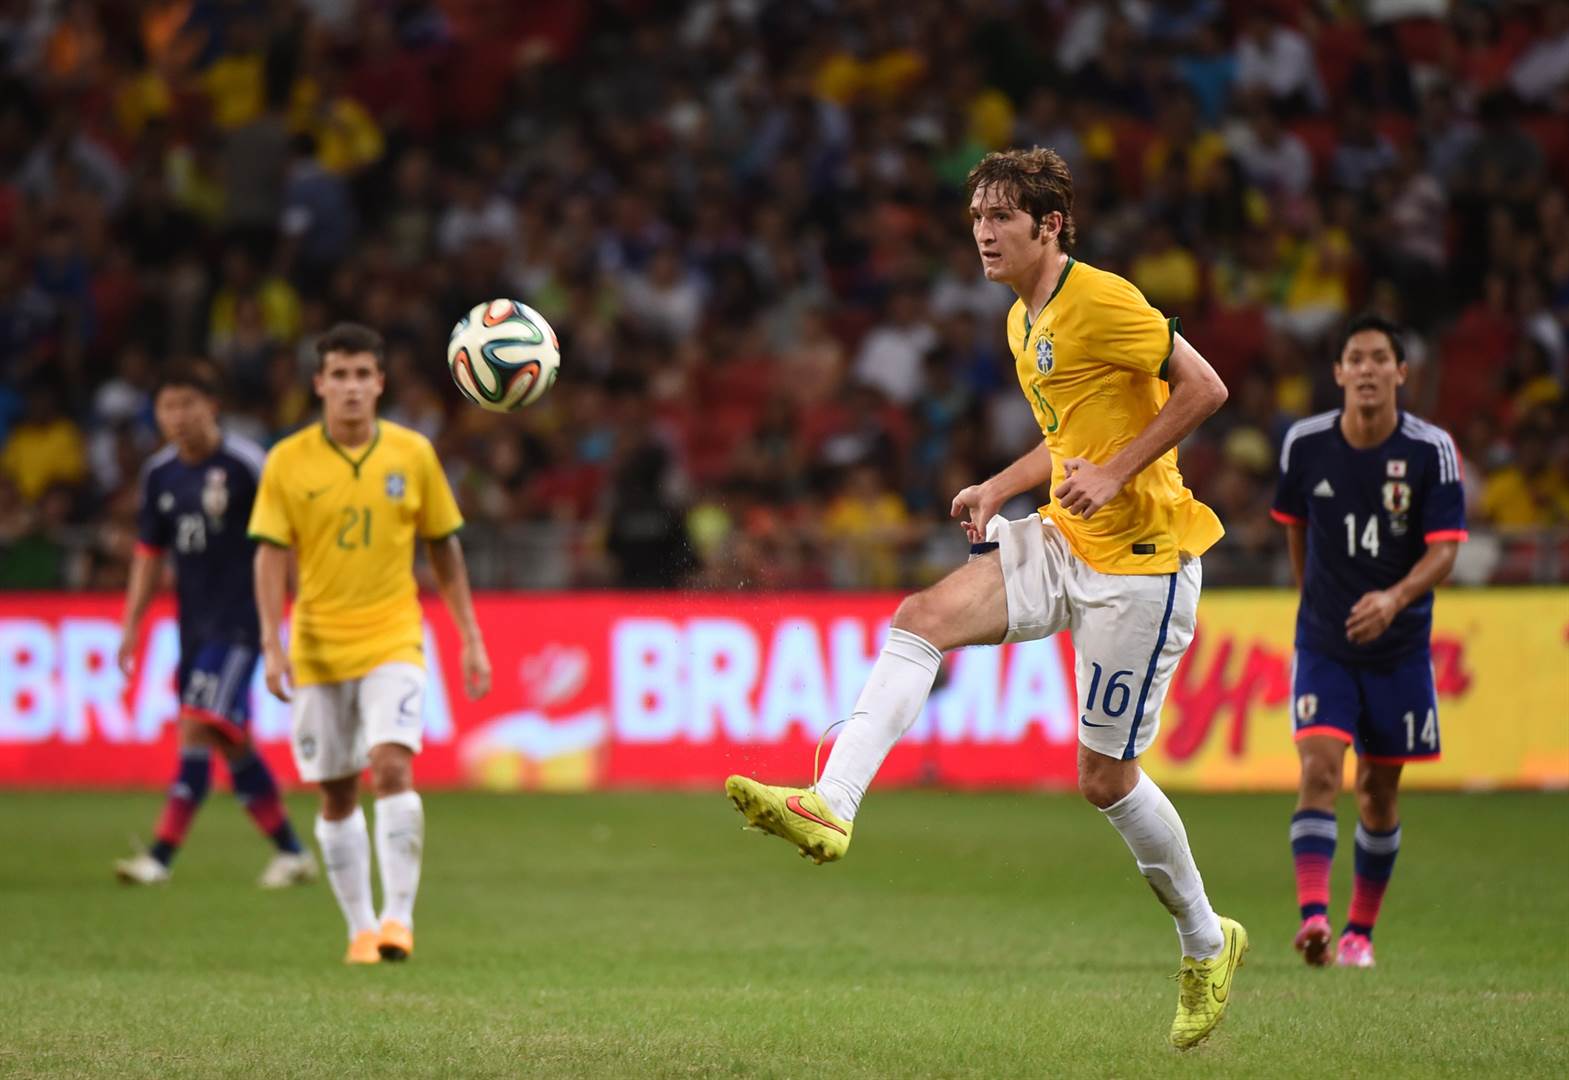 Mario Fernandes – Brazil and Russia